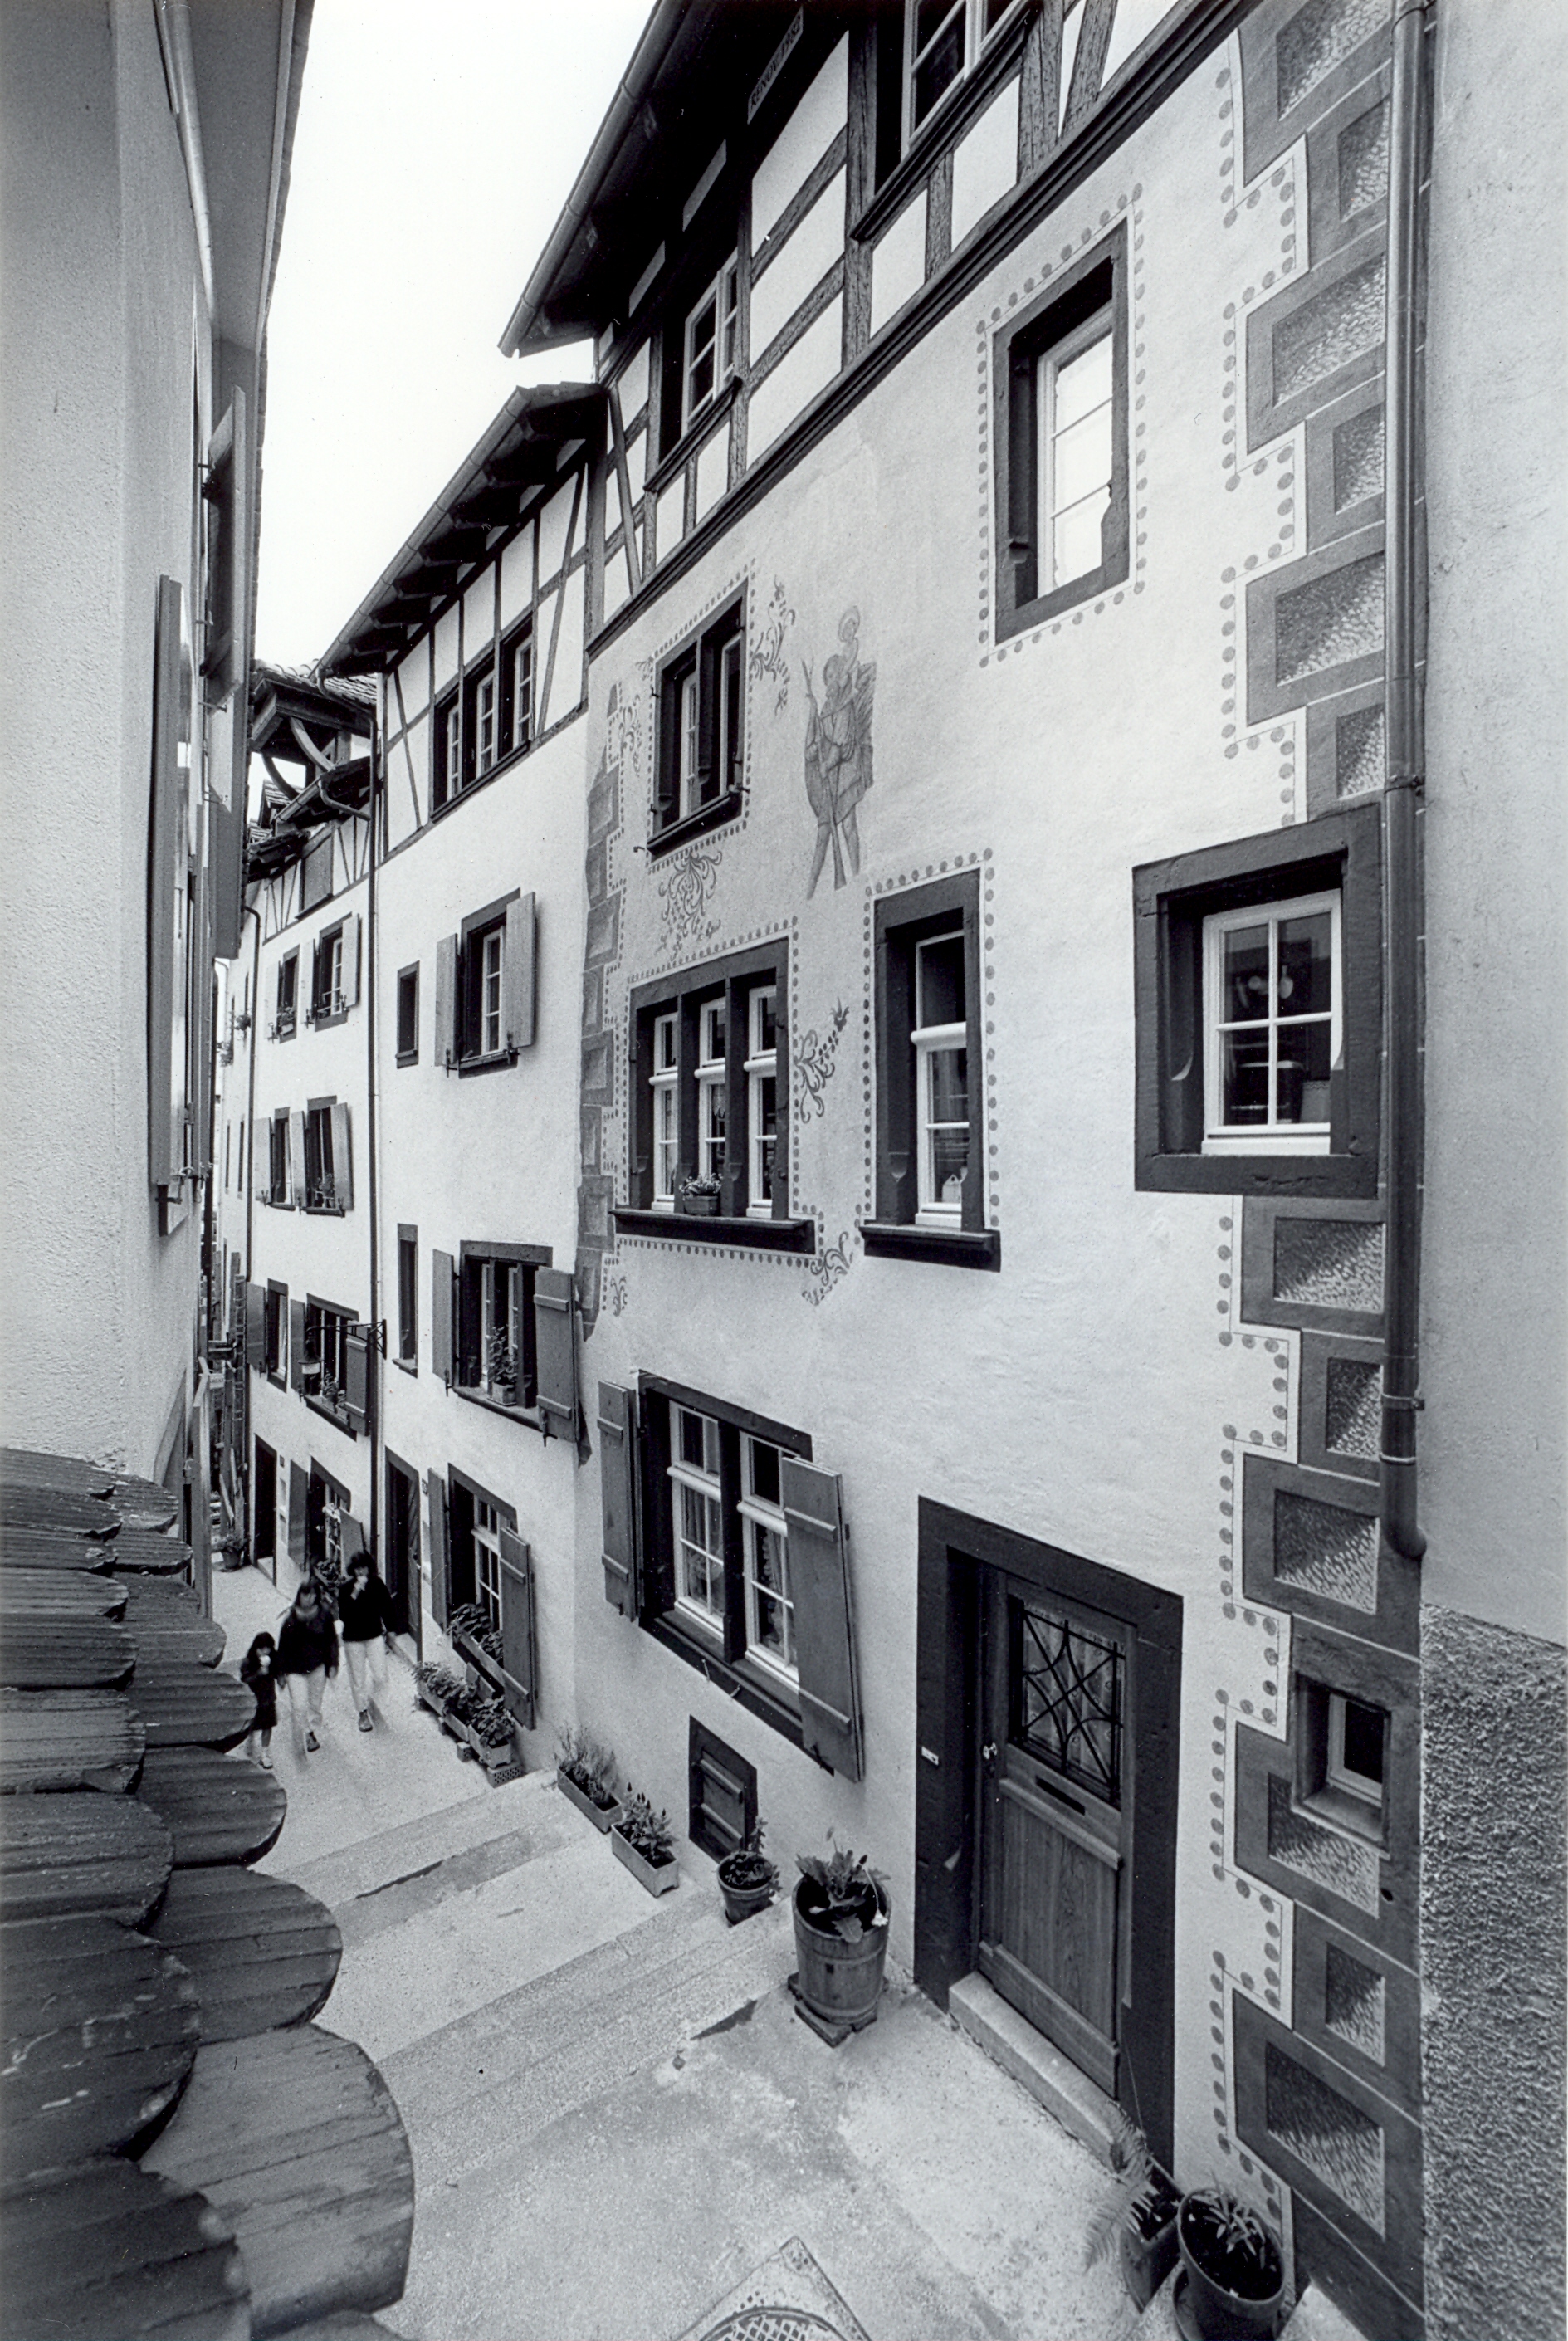 Image 'Urban renewal project: 40 residential houses in Basel Old Town '